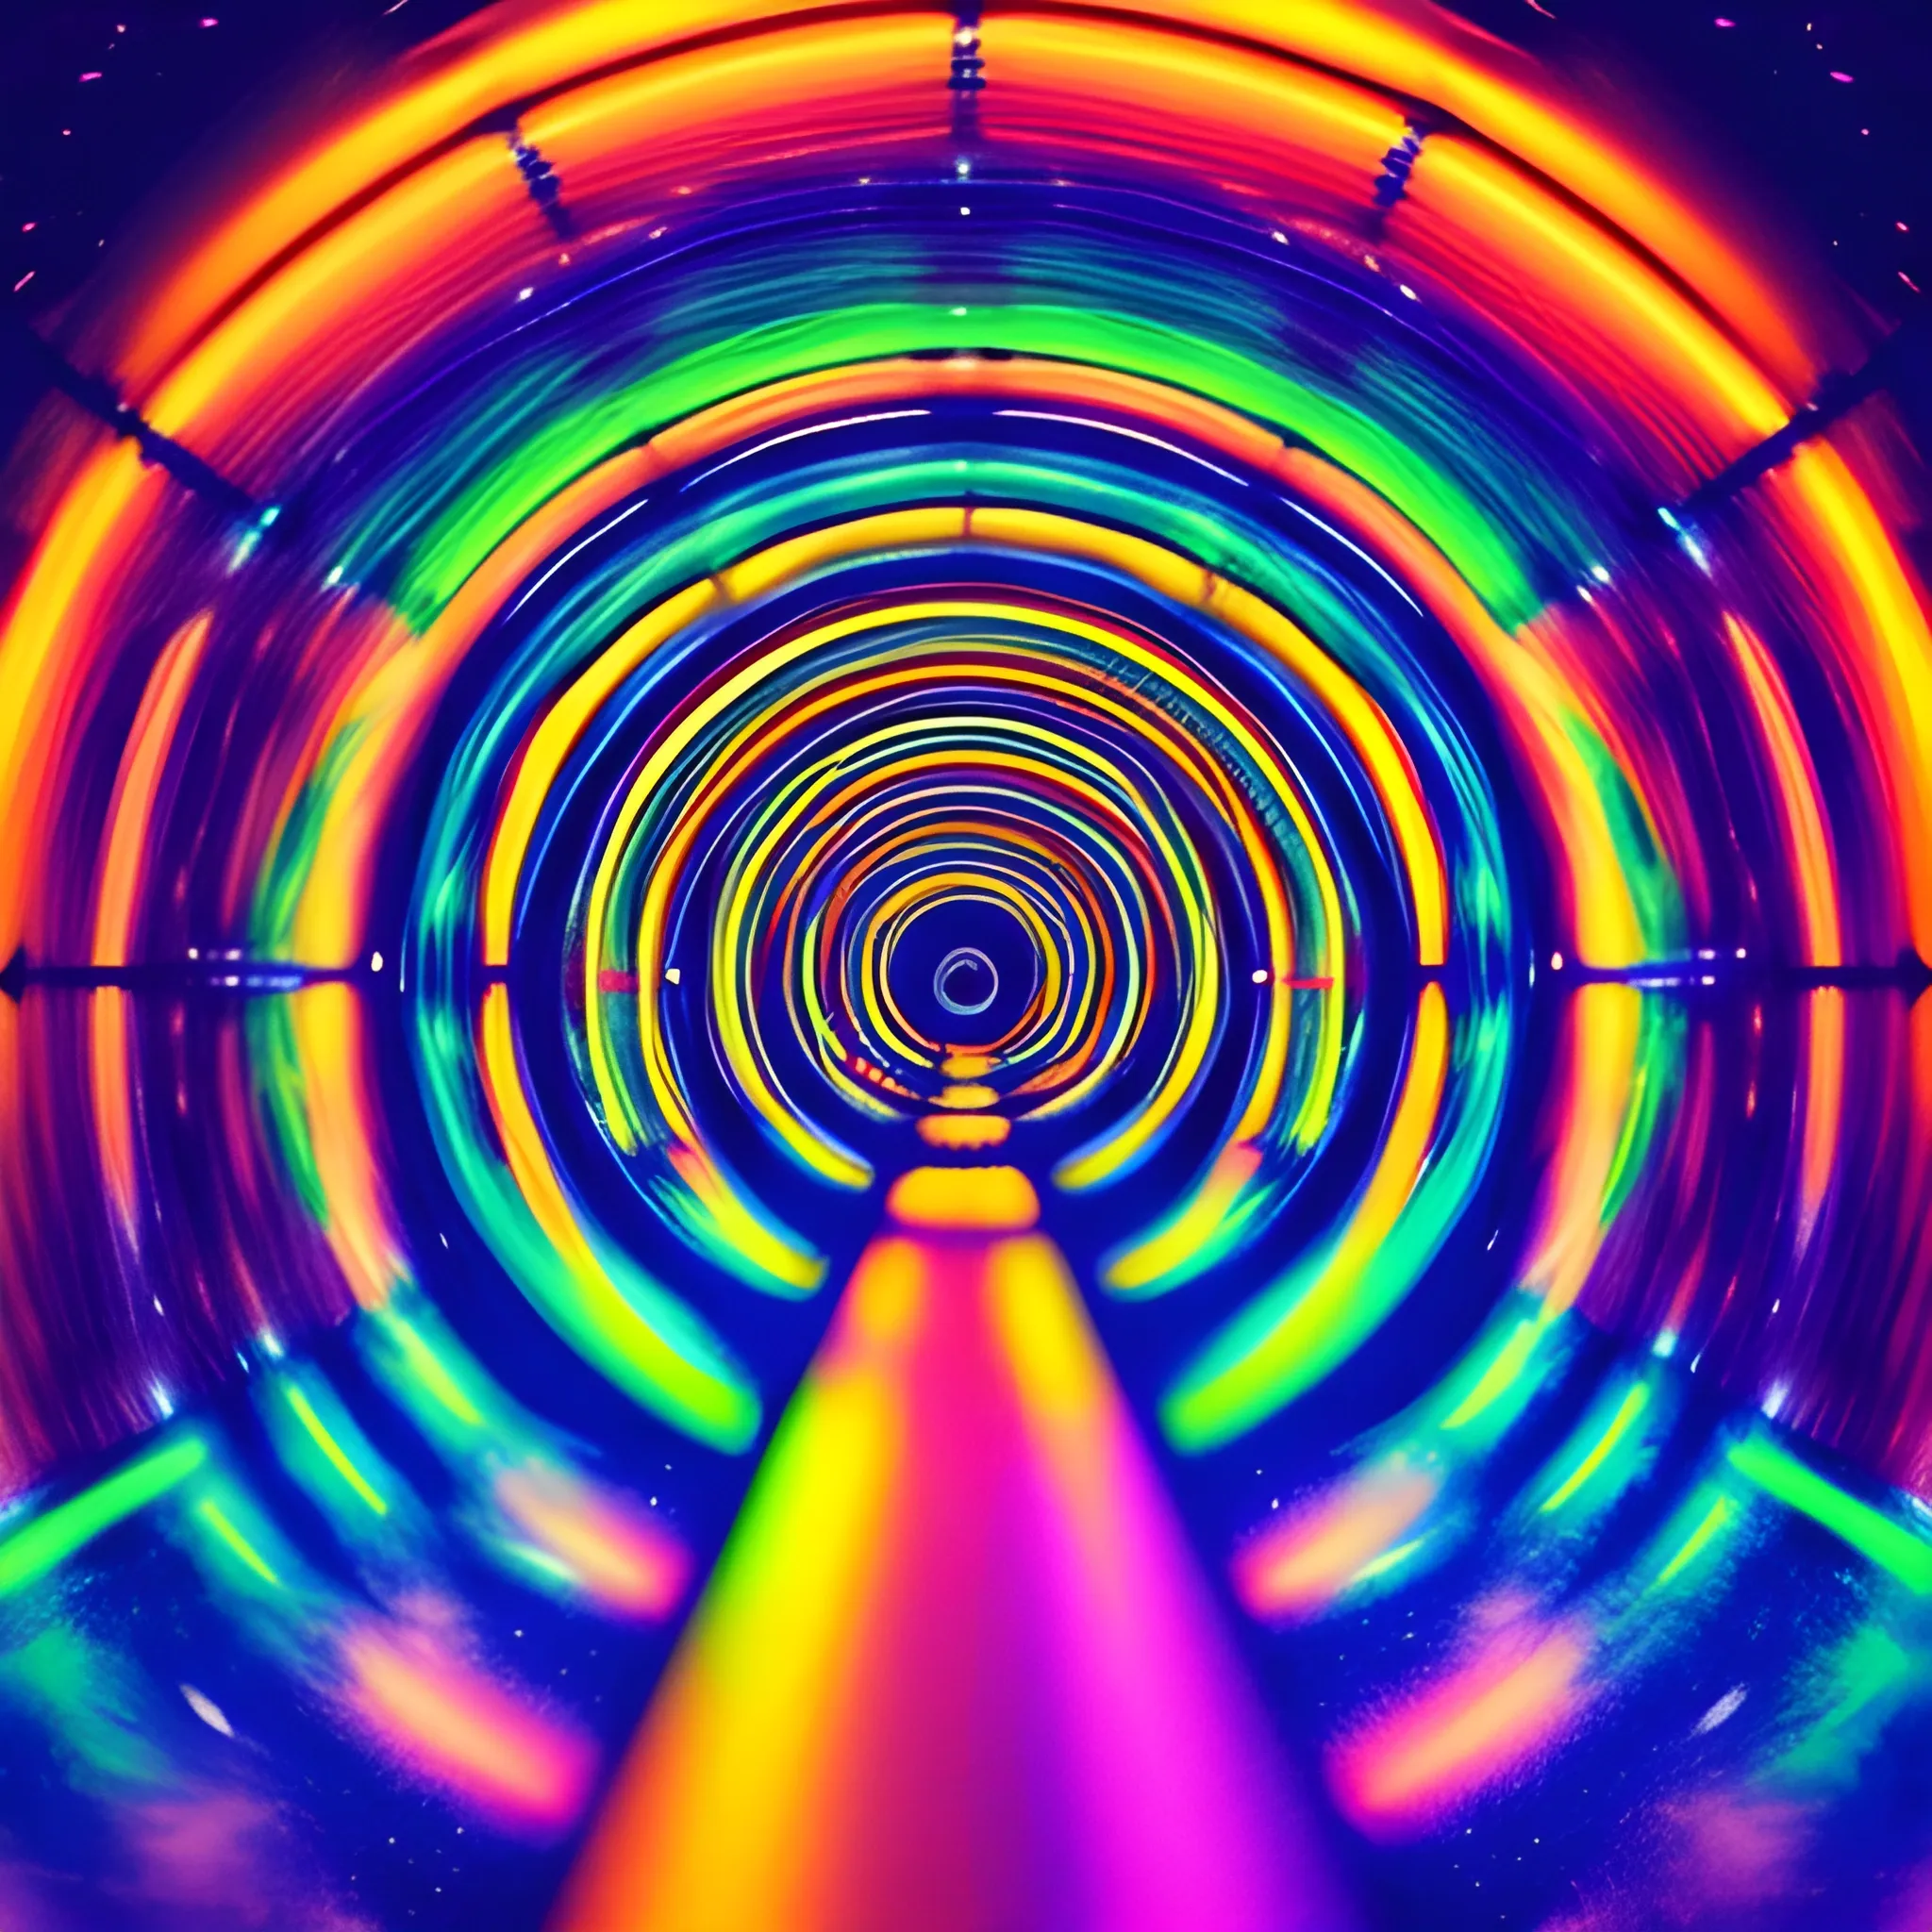 interior vision of a tunnel, very colorful psychedelic stroboscopic, spinning on itself shooting towards the starry sky in the background, Trippy